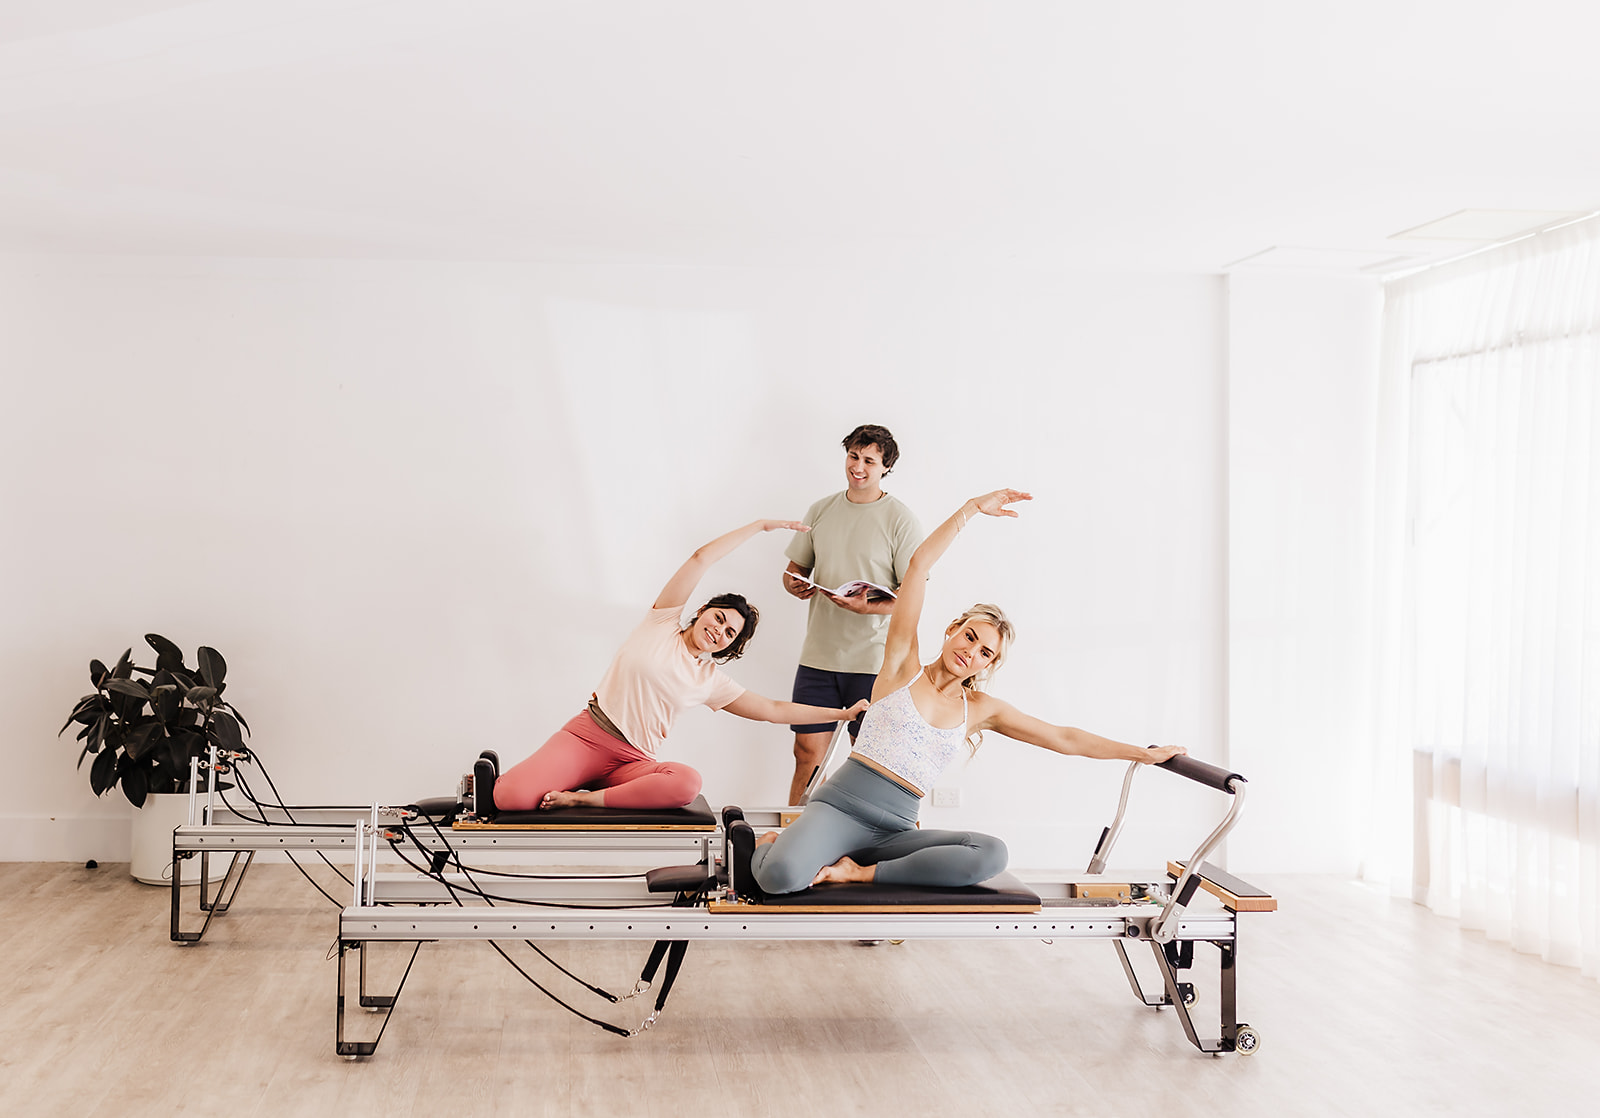 How to improve your employment opportunities as a Pilates instructor